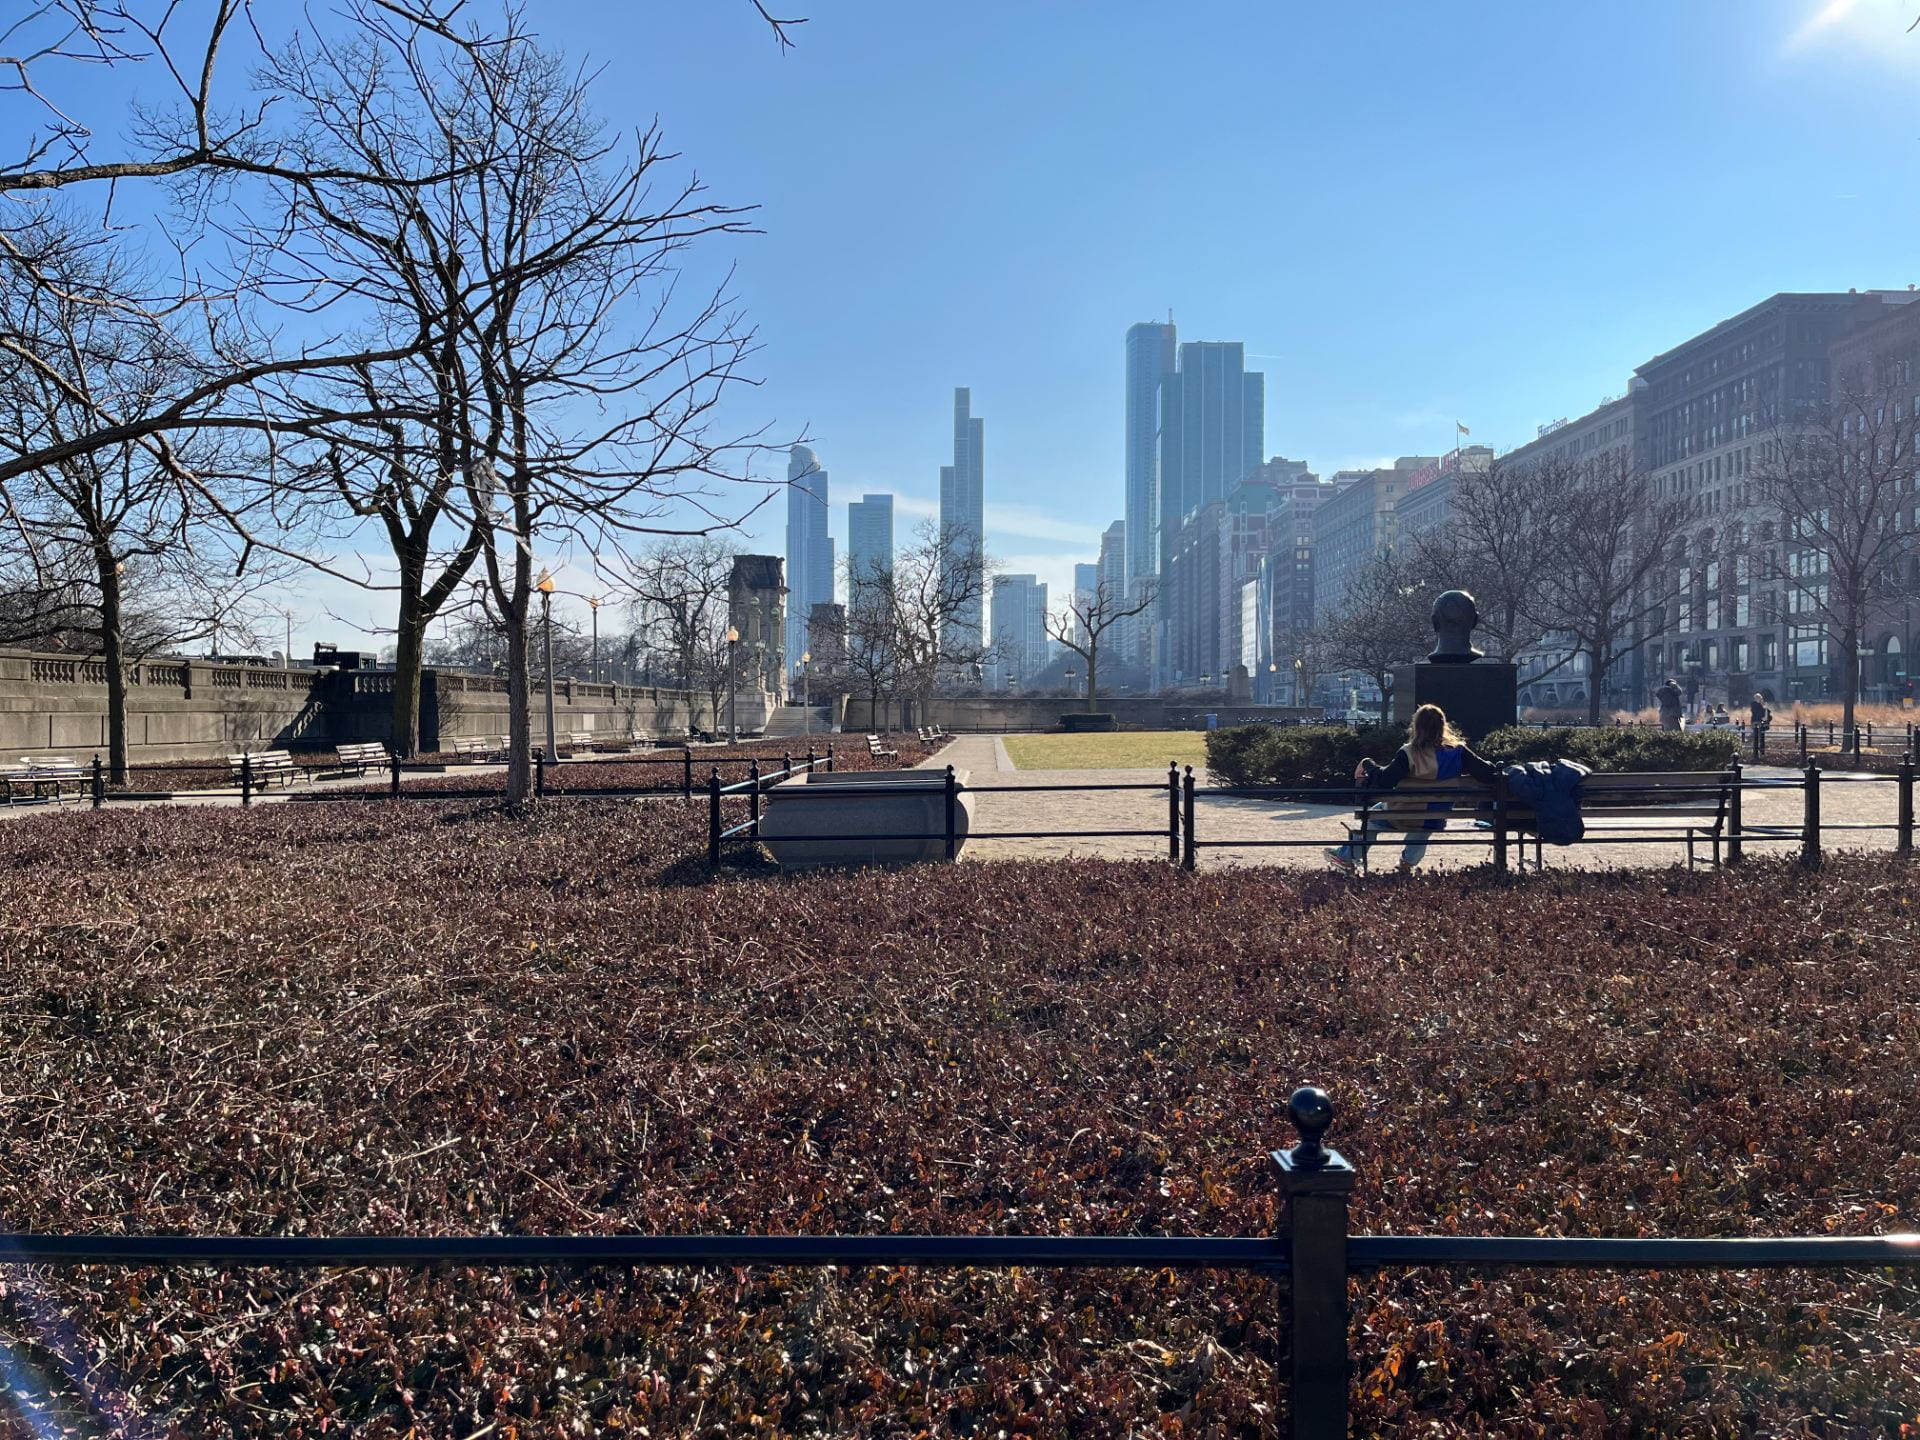 Chicago park with benches, trees and brush, with the Chicago Skyline in the background.